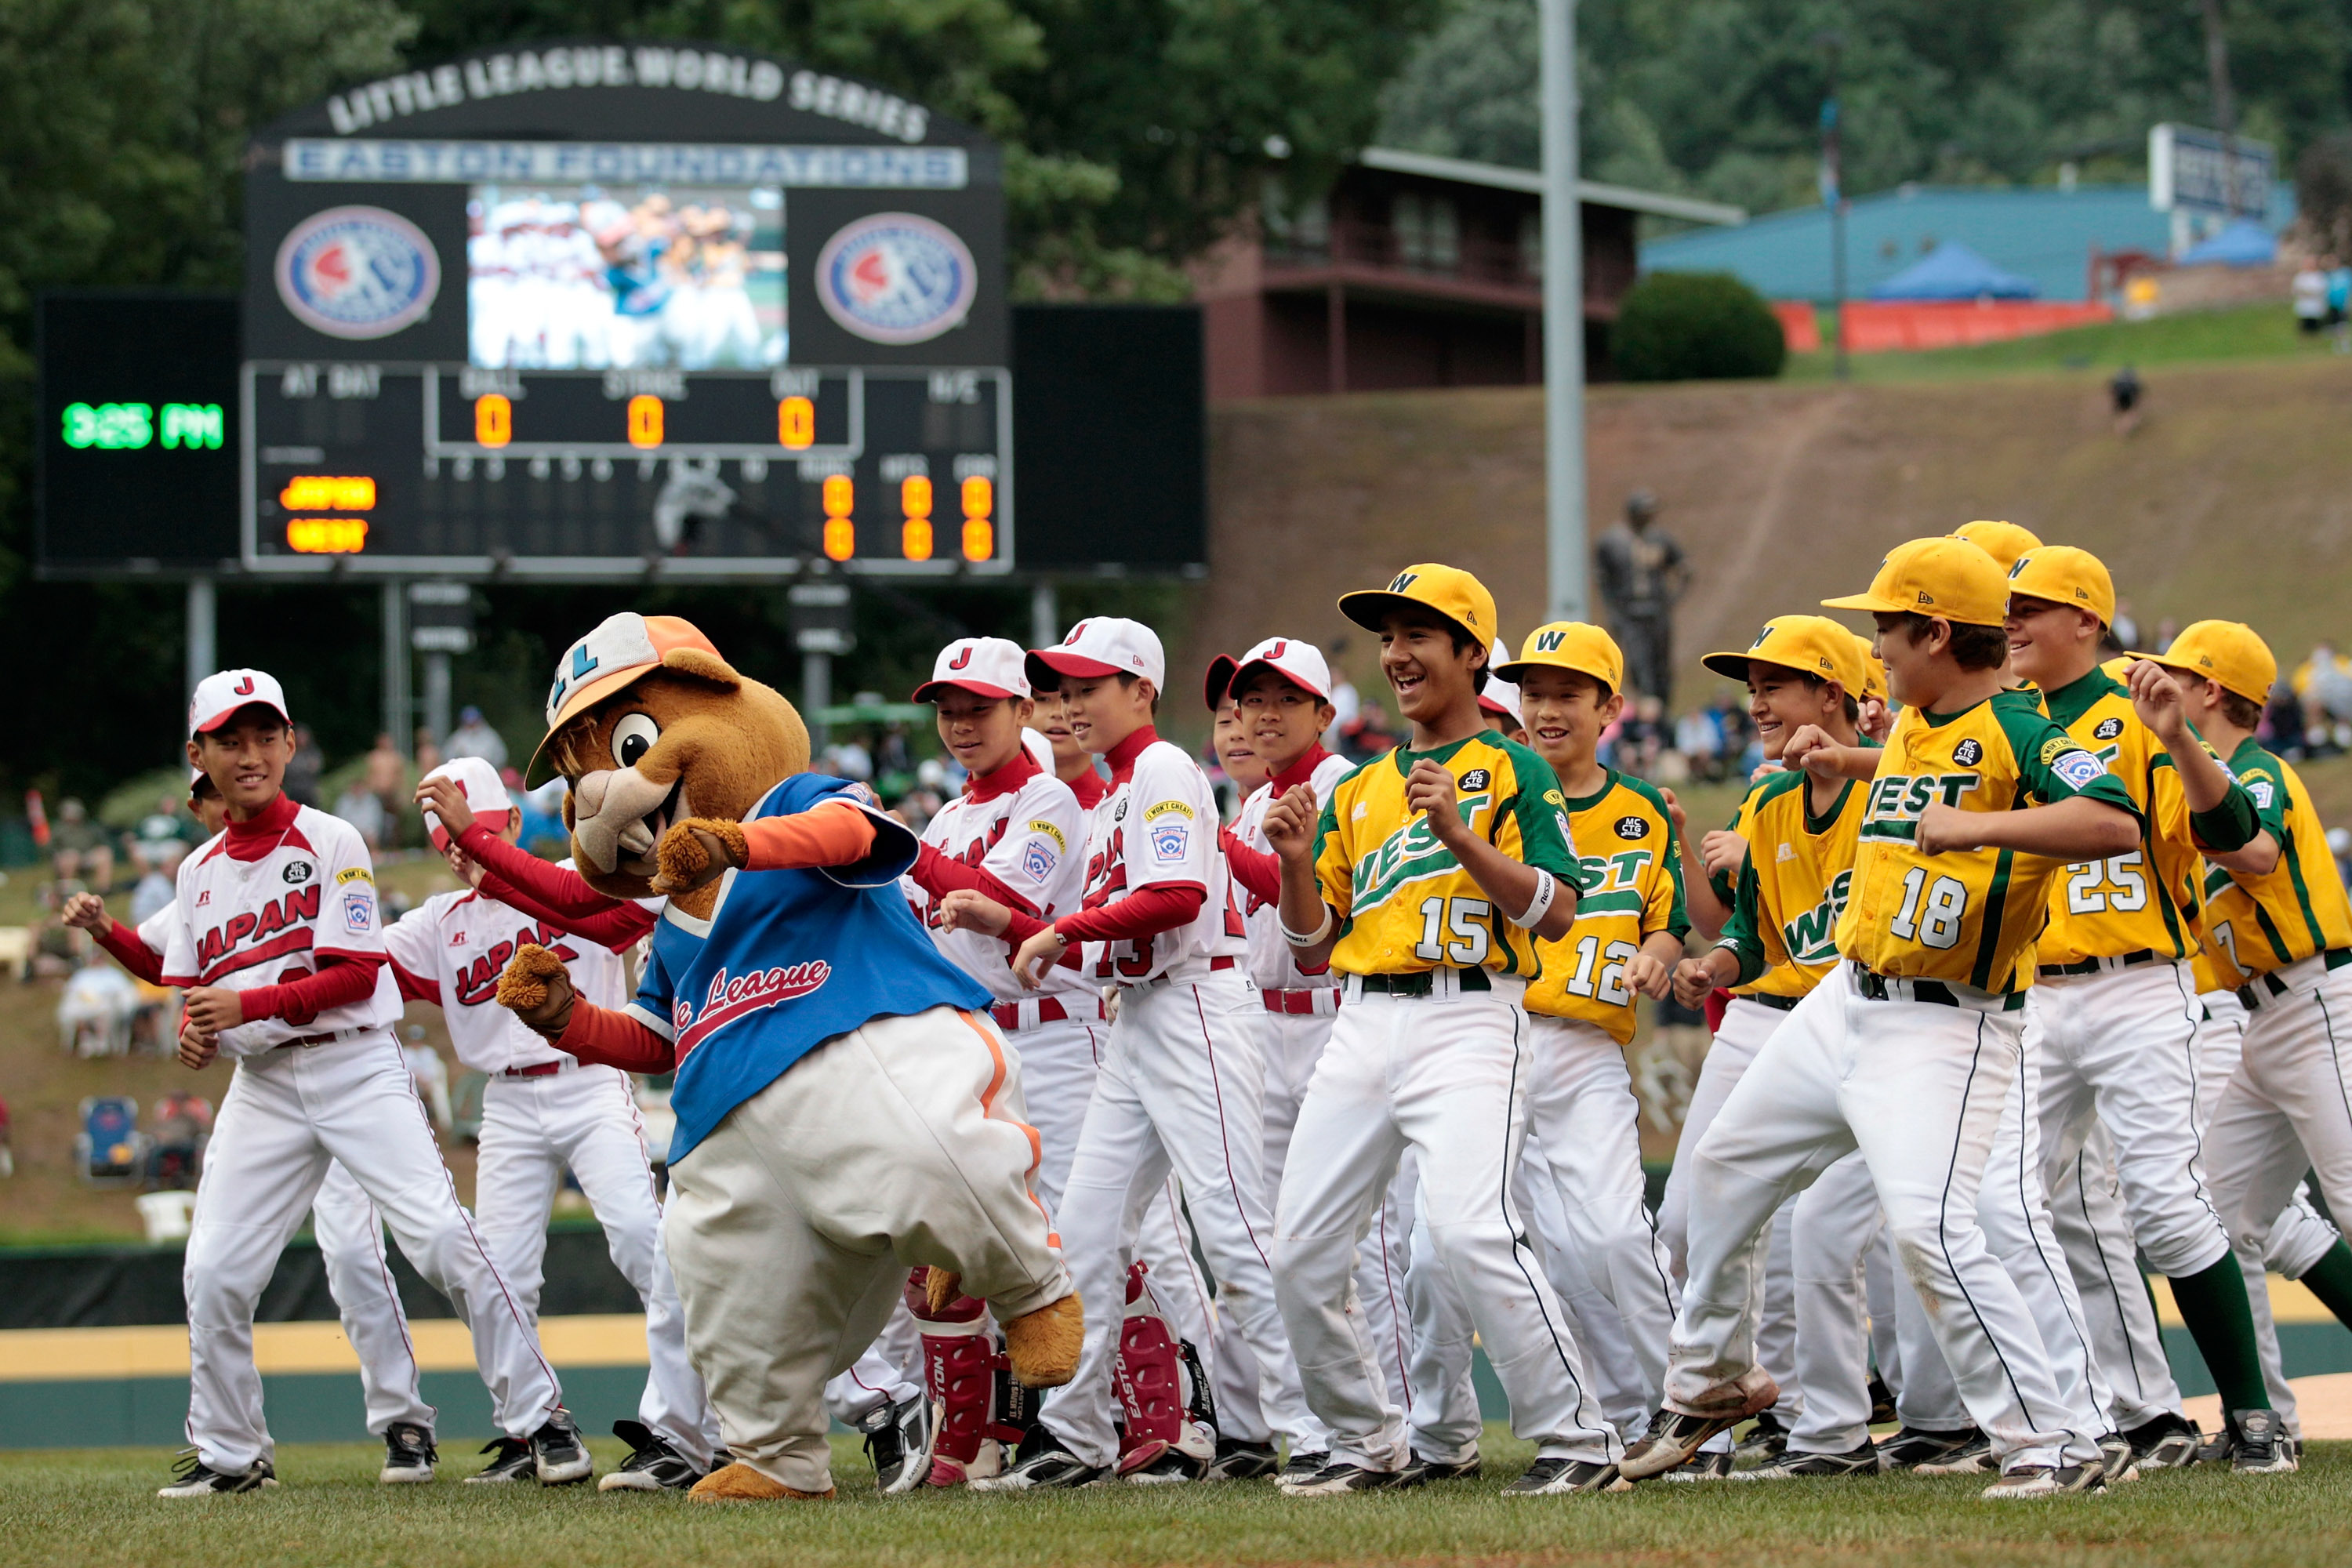 Little League World Series 2013 Scores Day 5 Results, Highlights and